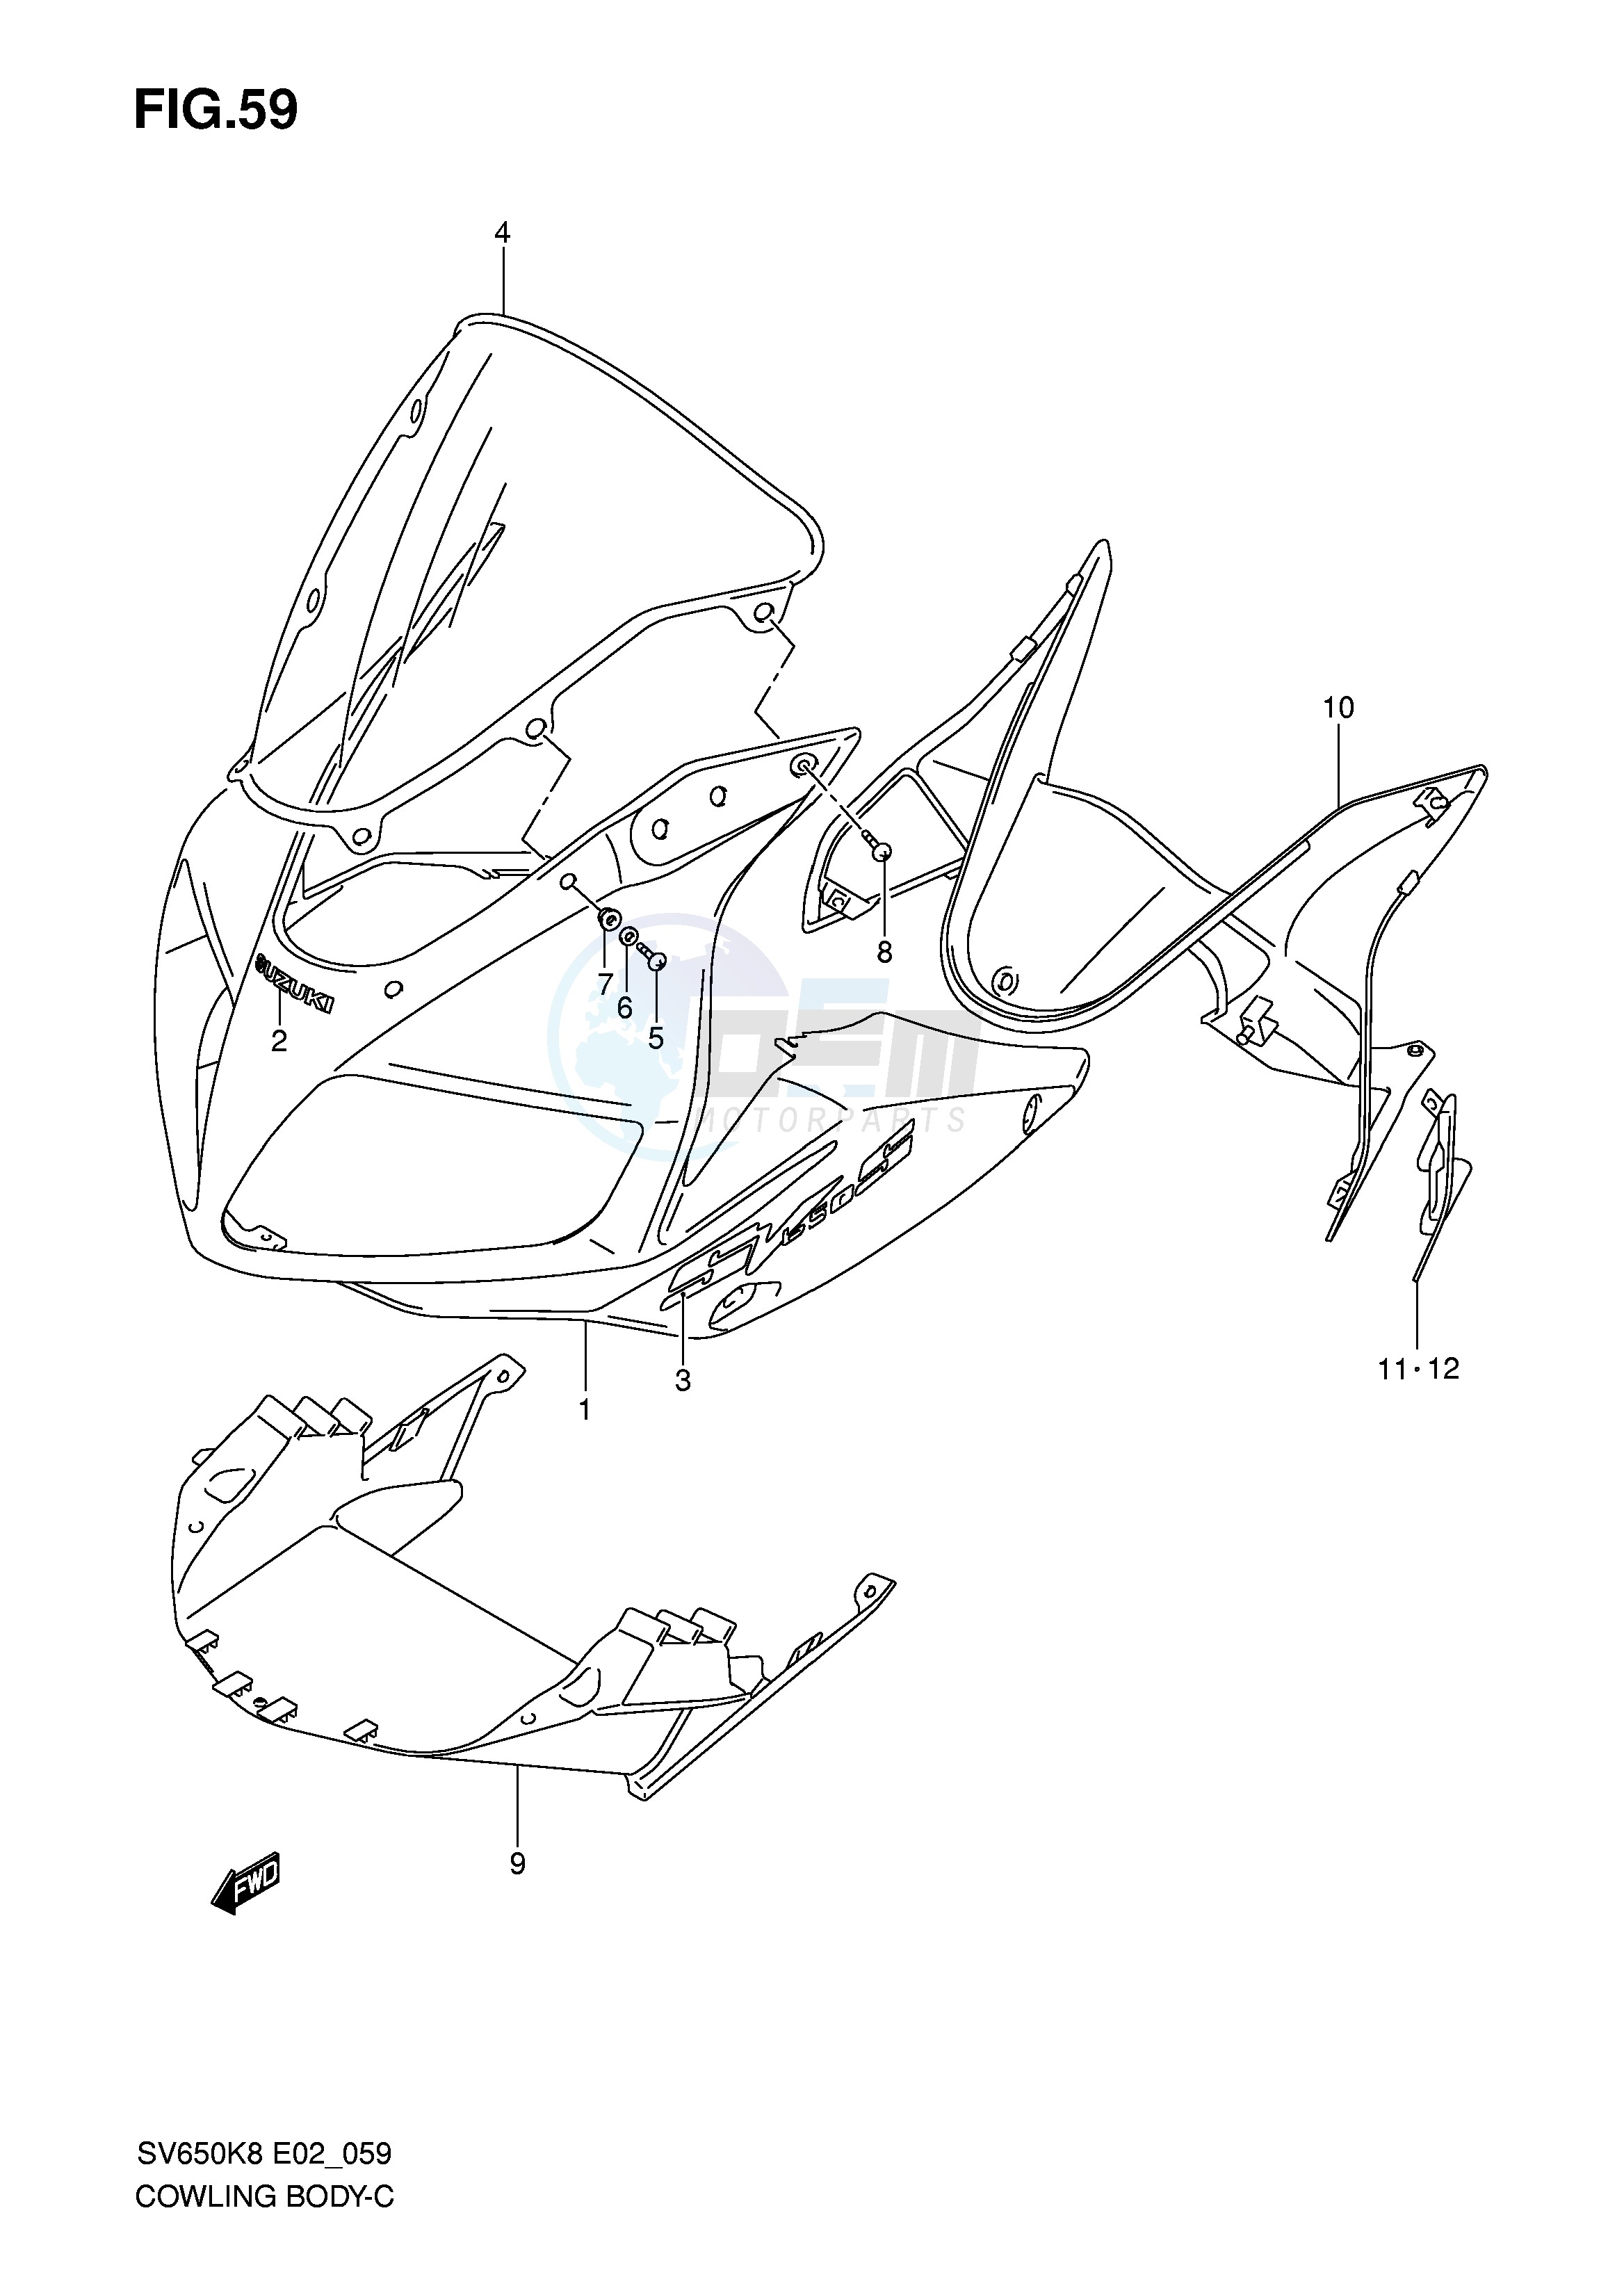 COWLING BODY (MODEL K8 WITH COWLING) blueprint